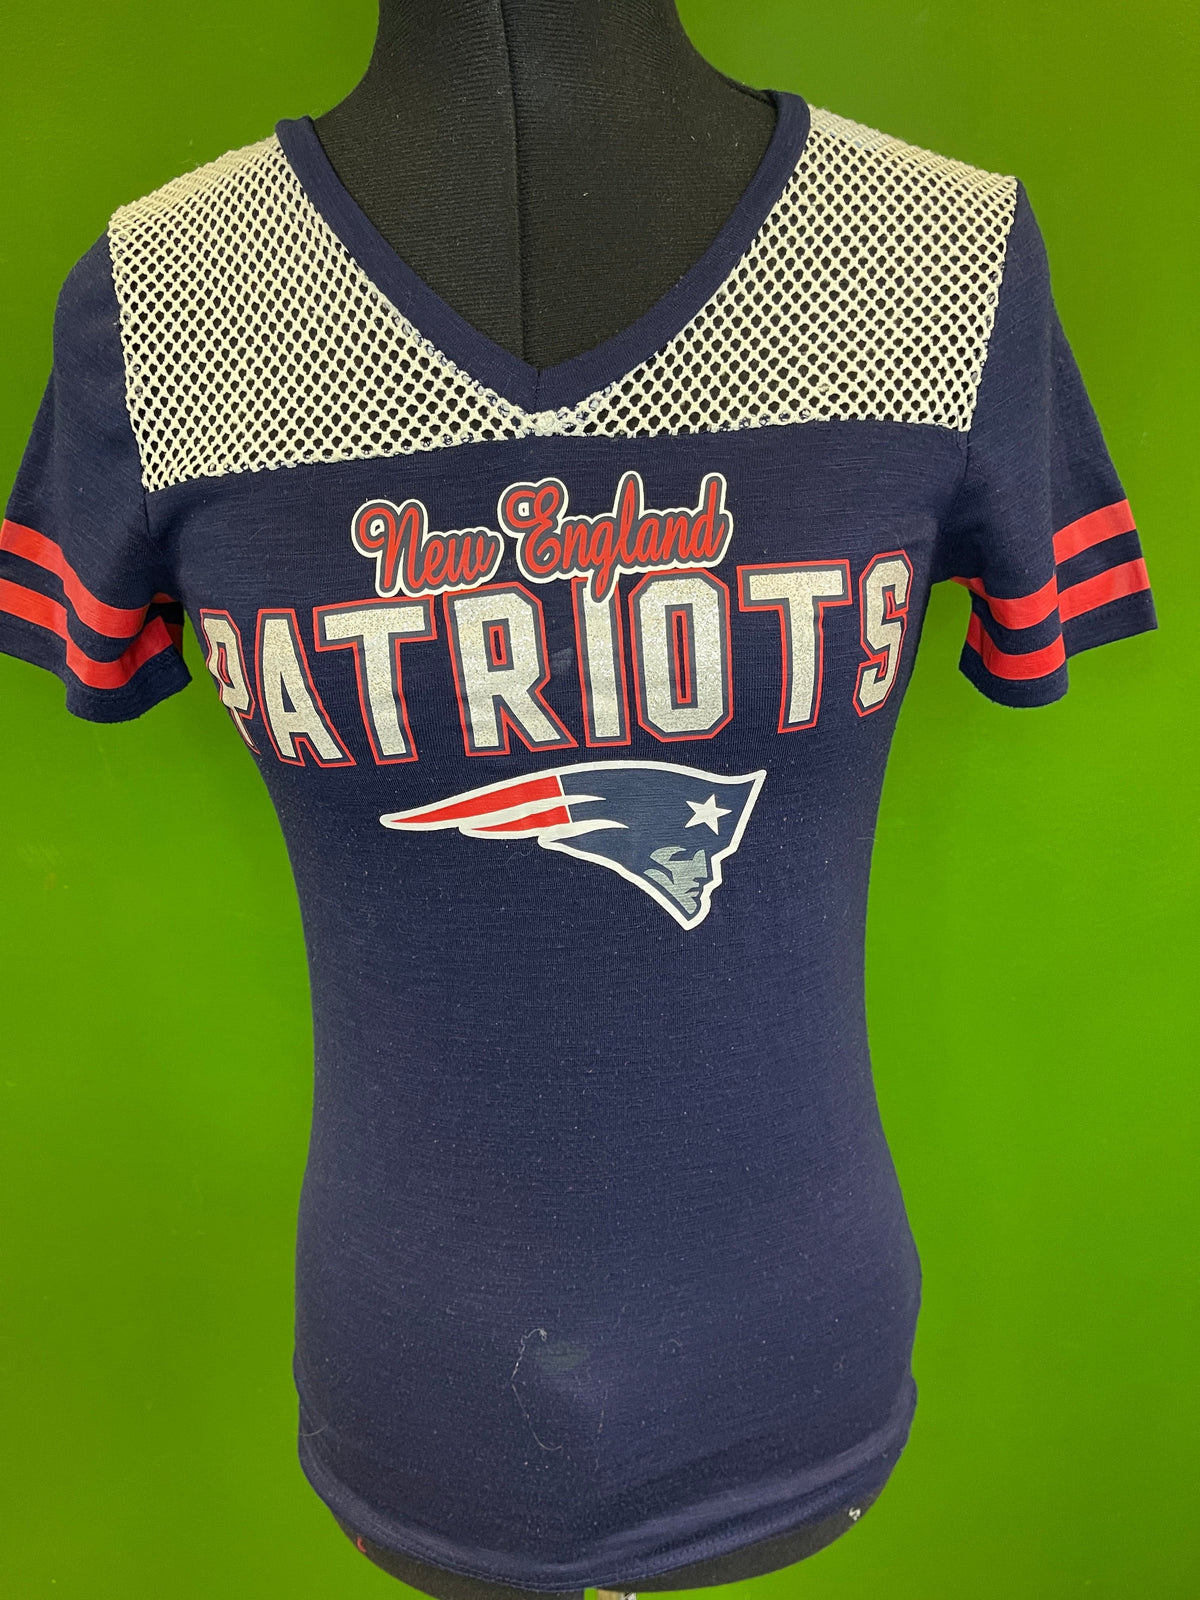 NFL New England Patriots Sparkly Mesh Tissue T-Shirt Women's X-Small